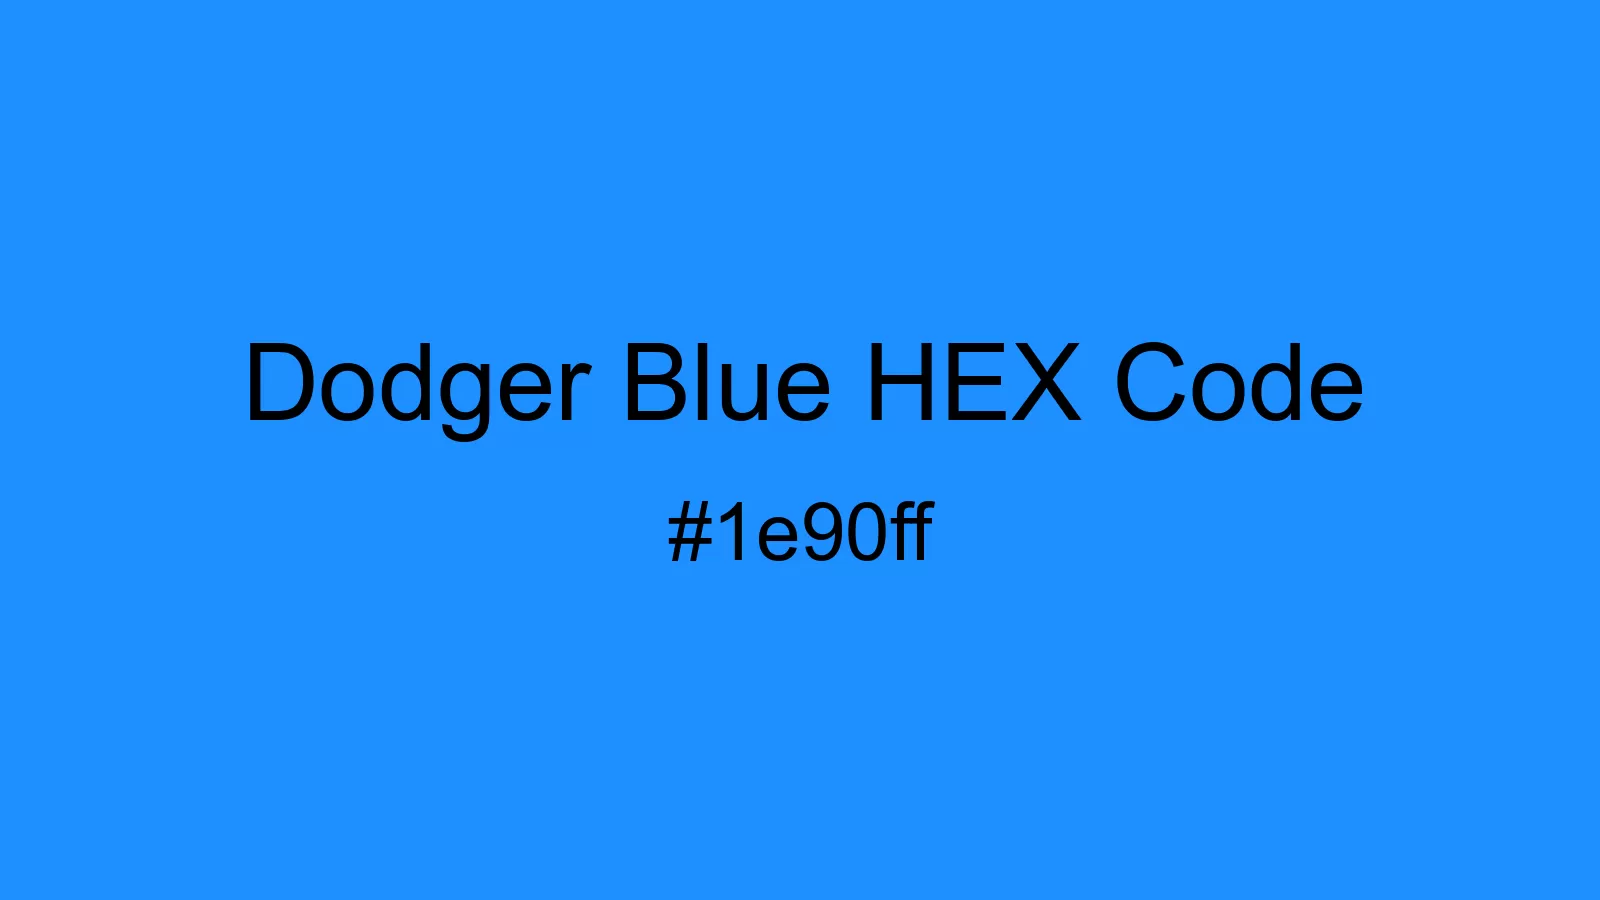 preview image of Dodger Blue color and HEX code